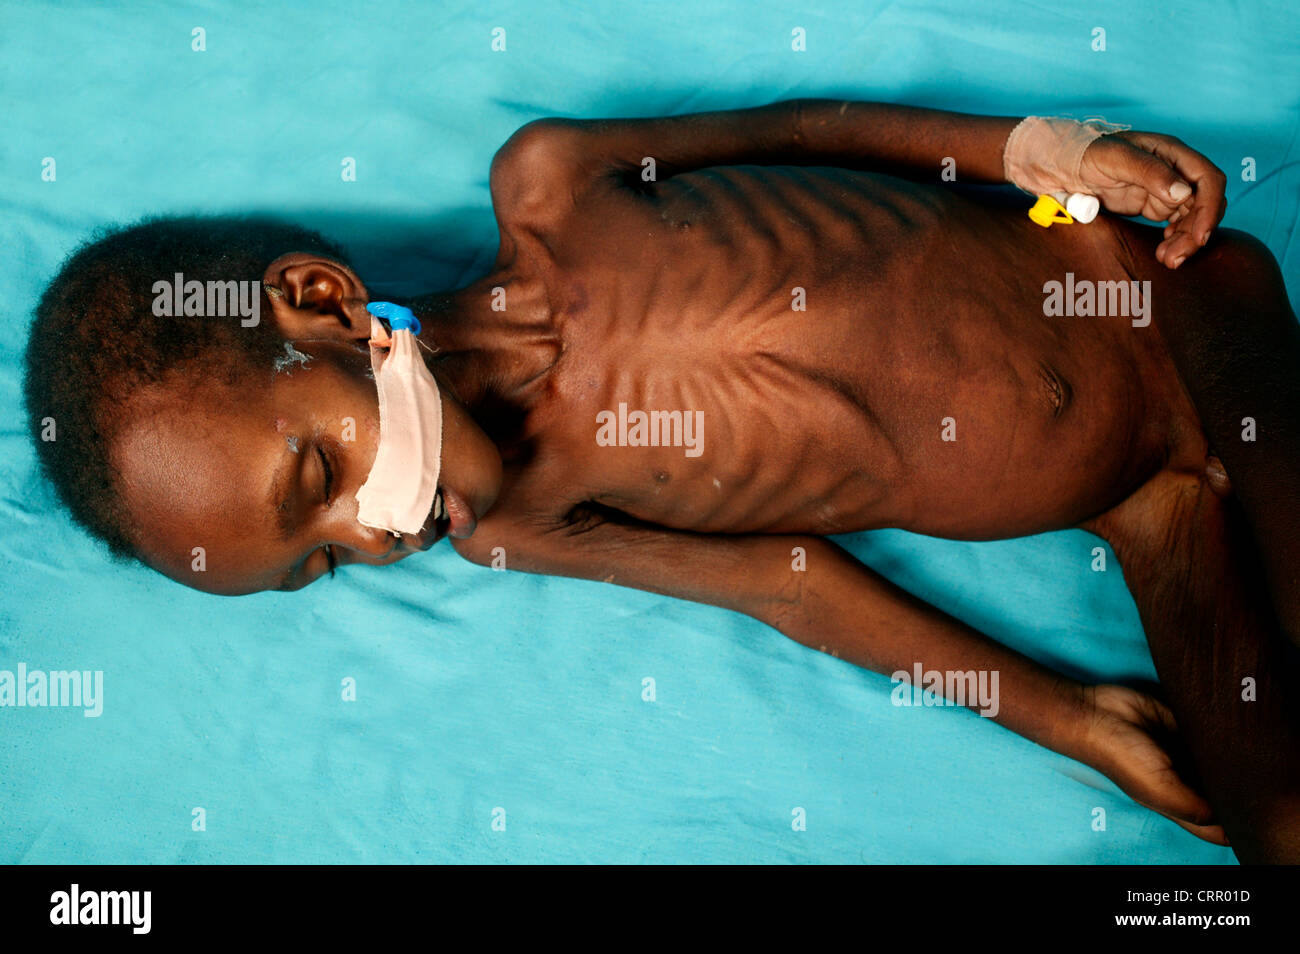 A 2 year old boy suffering from serious malnutrition with severe wastening and loss of subcutaneous fat. Stock Photo